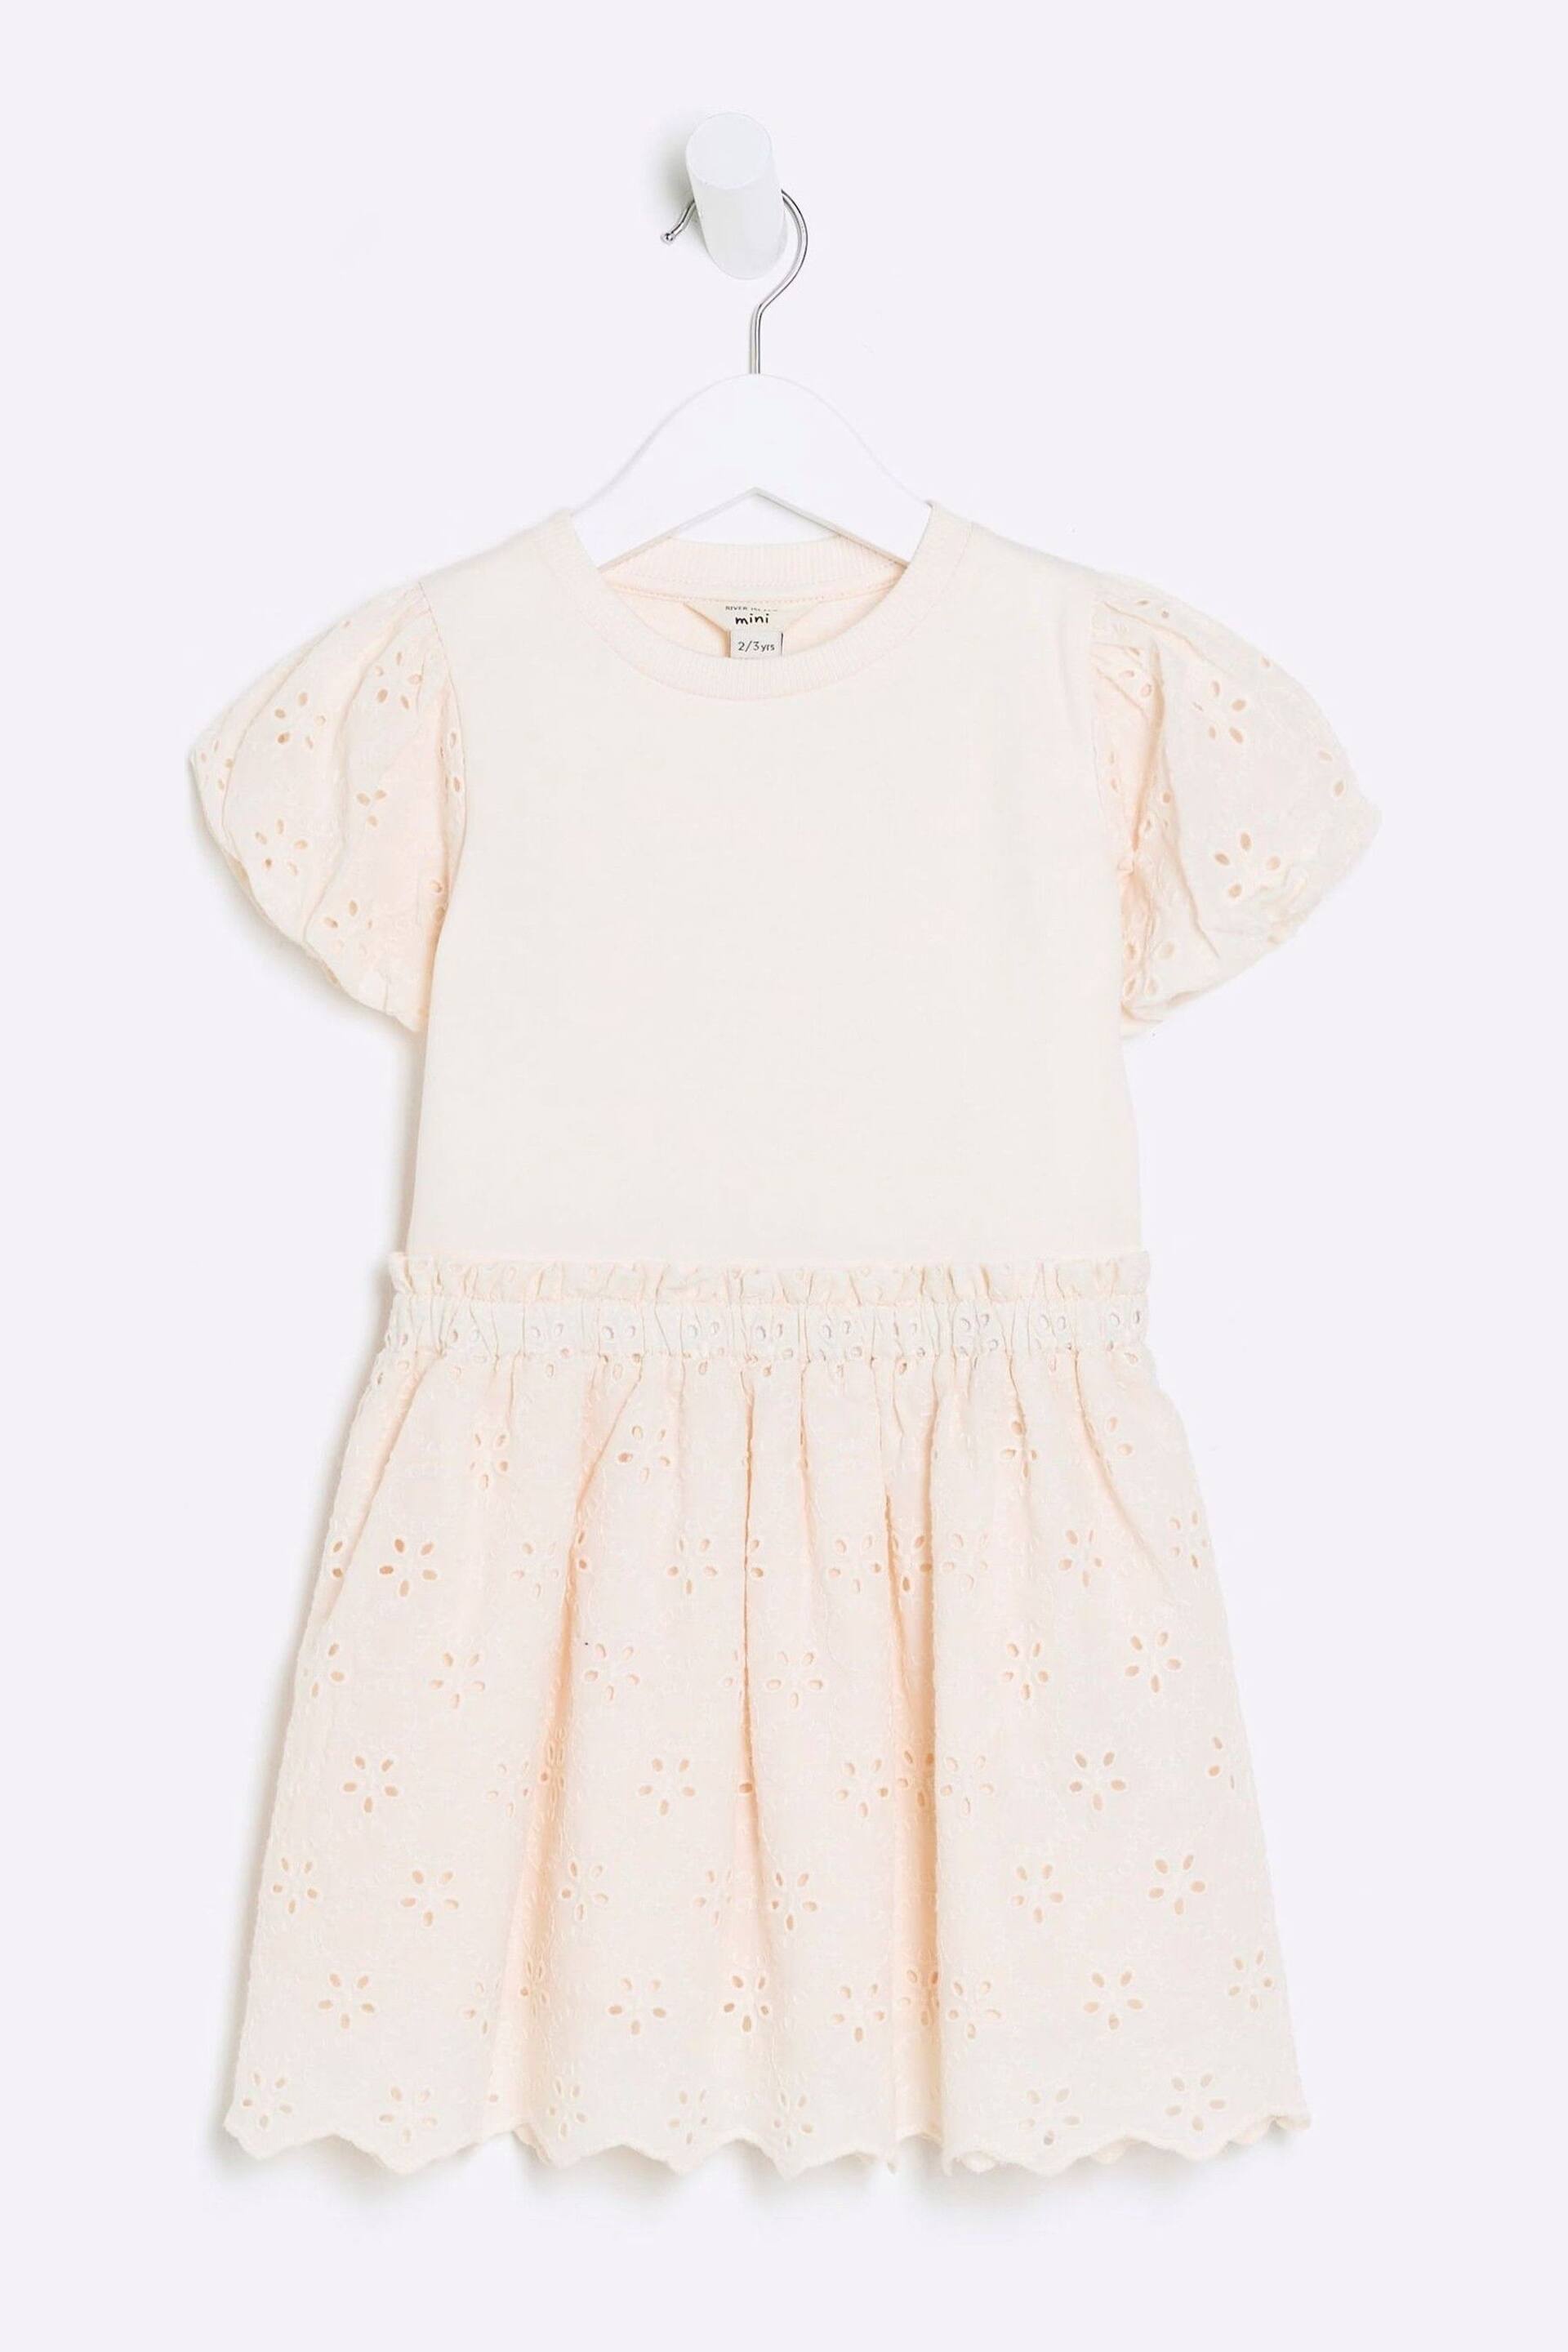 River Island Pink Mini Girls Pink Broderie Dress - Image 1 of 4